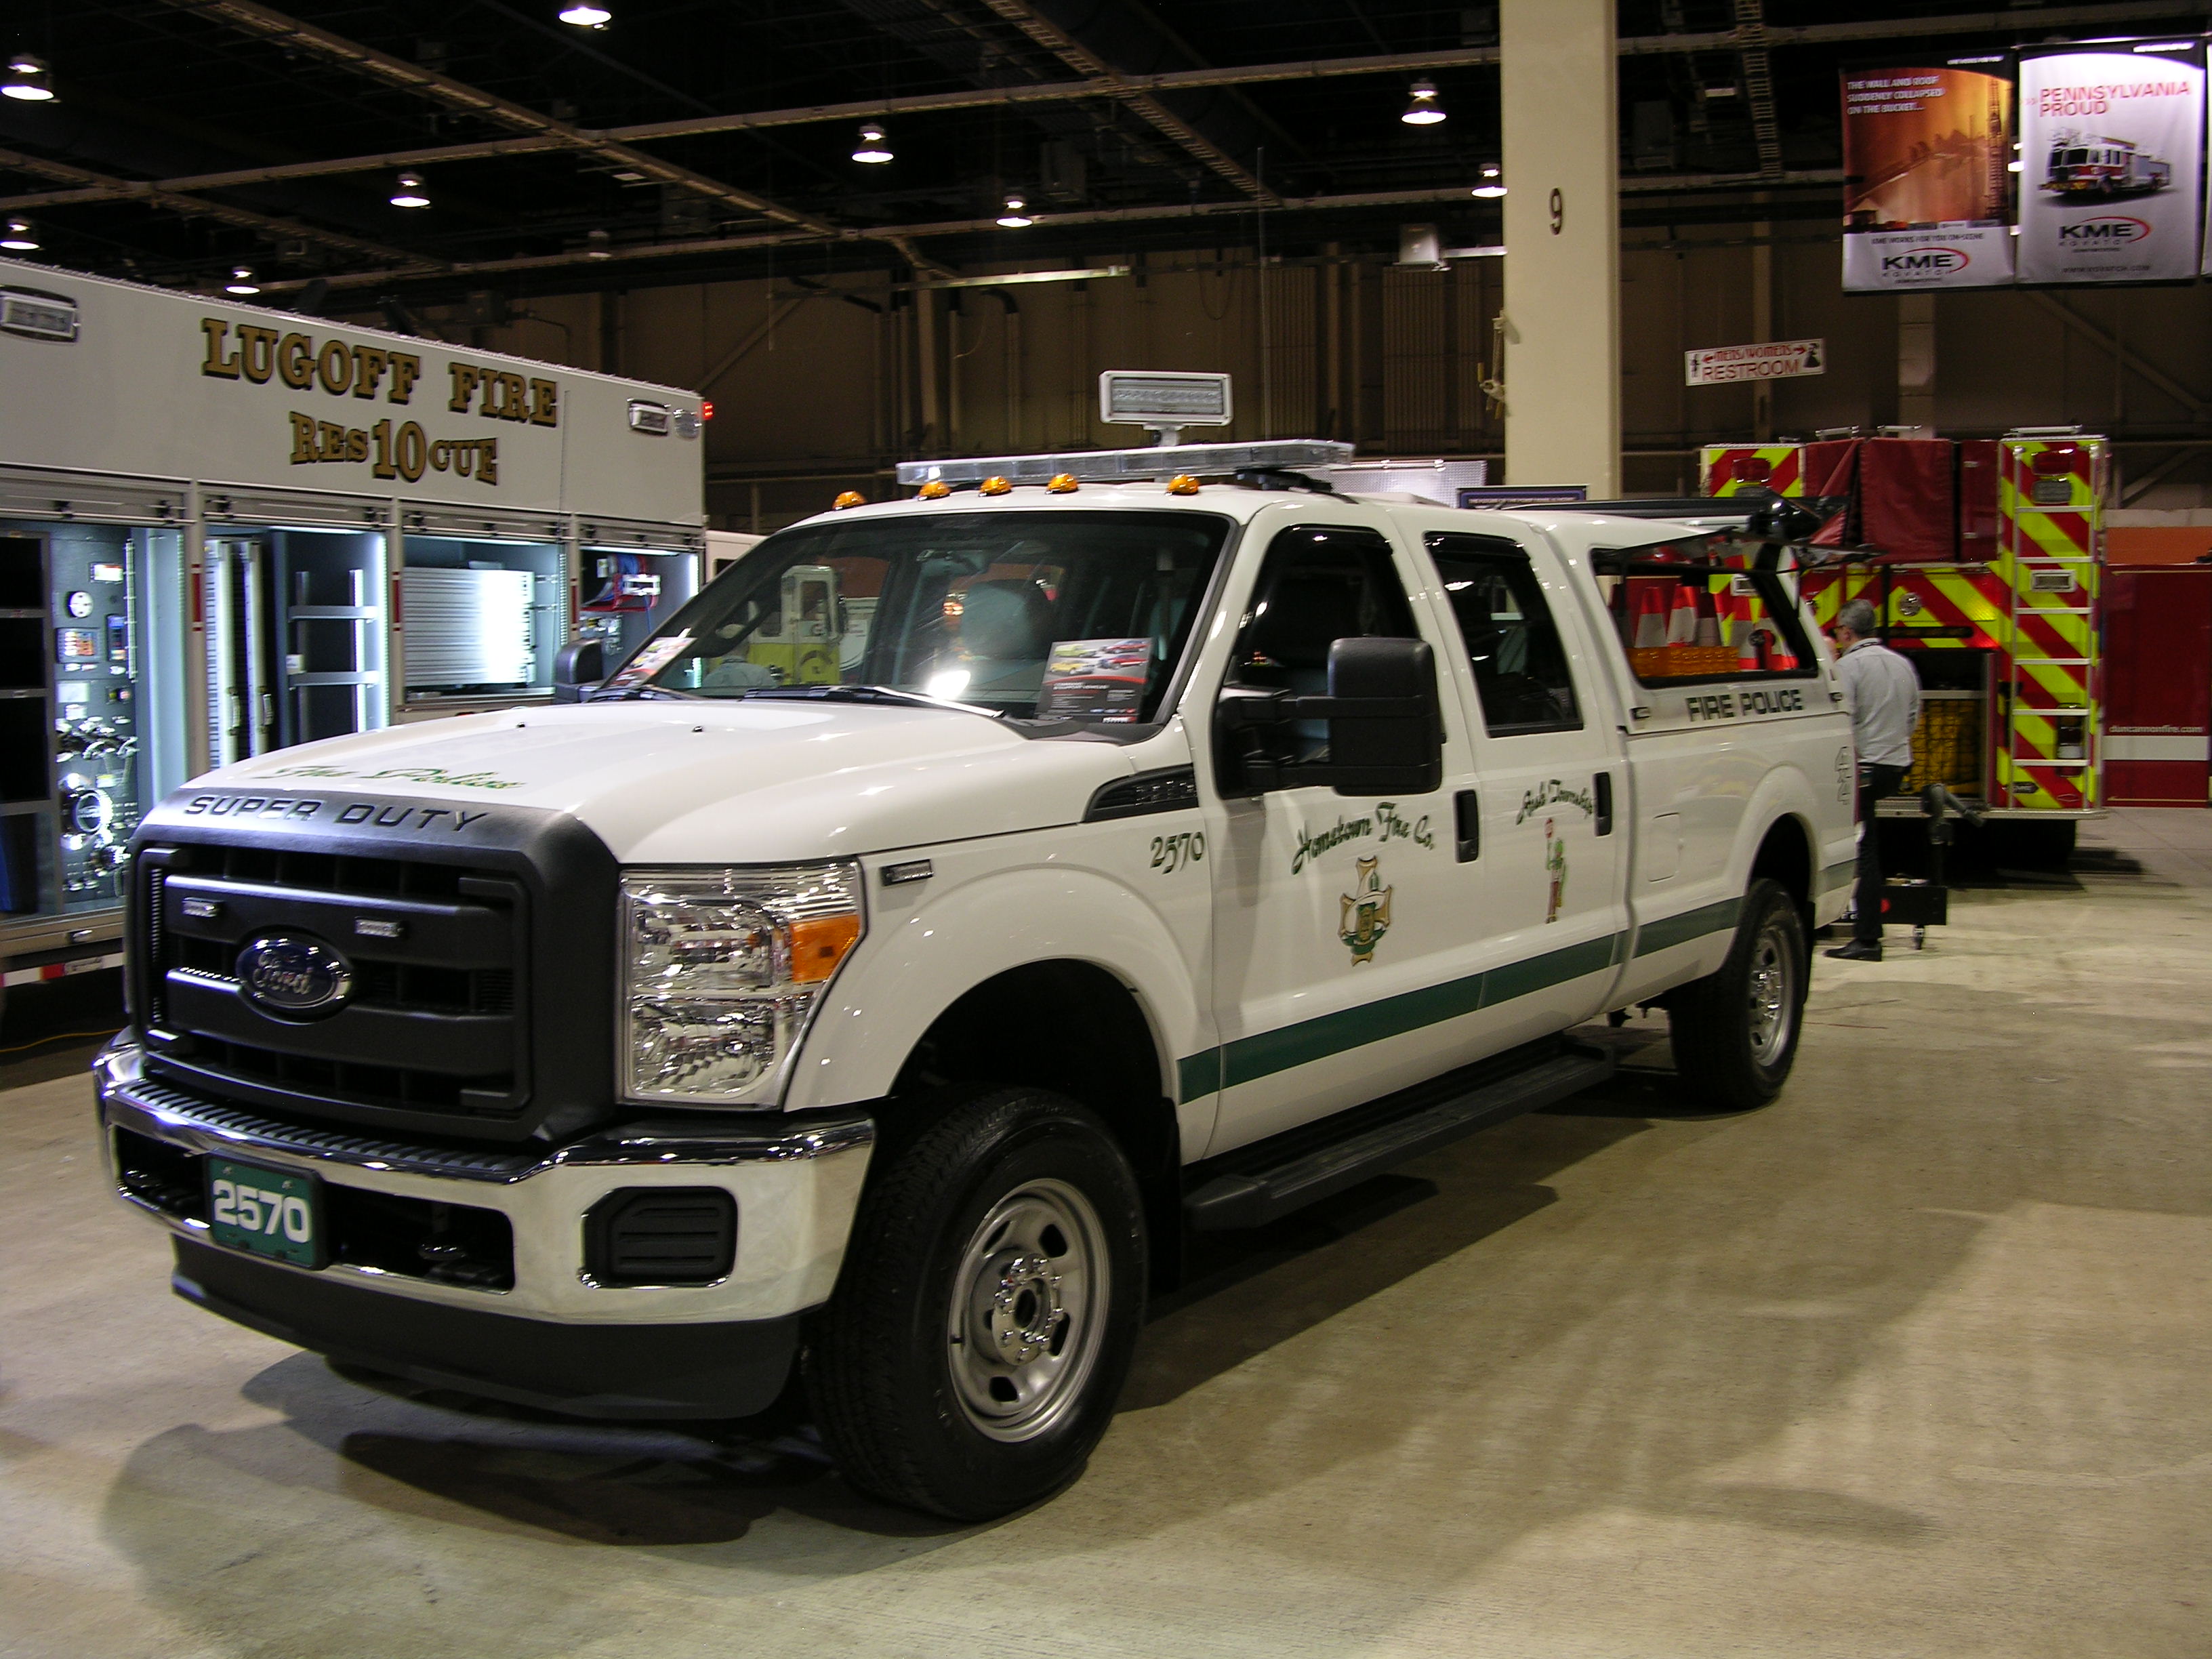 Hometown, PA Ford F-350 Fire Police Vehicle